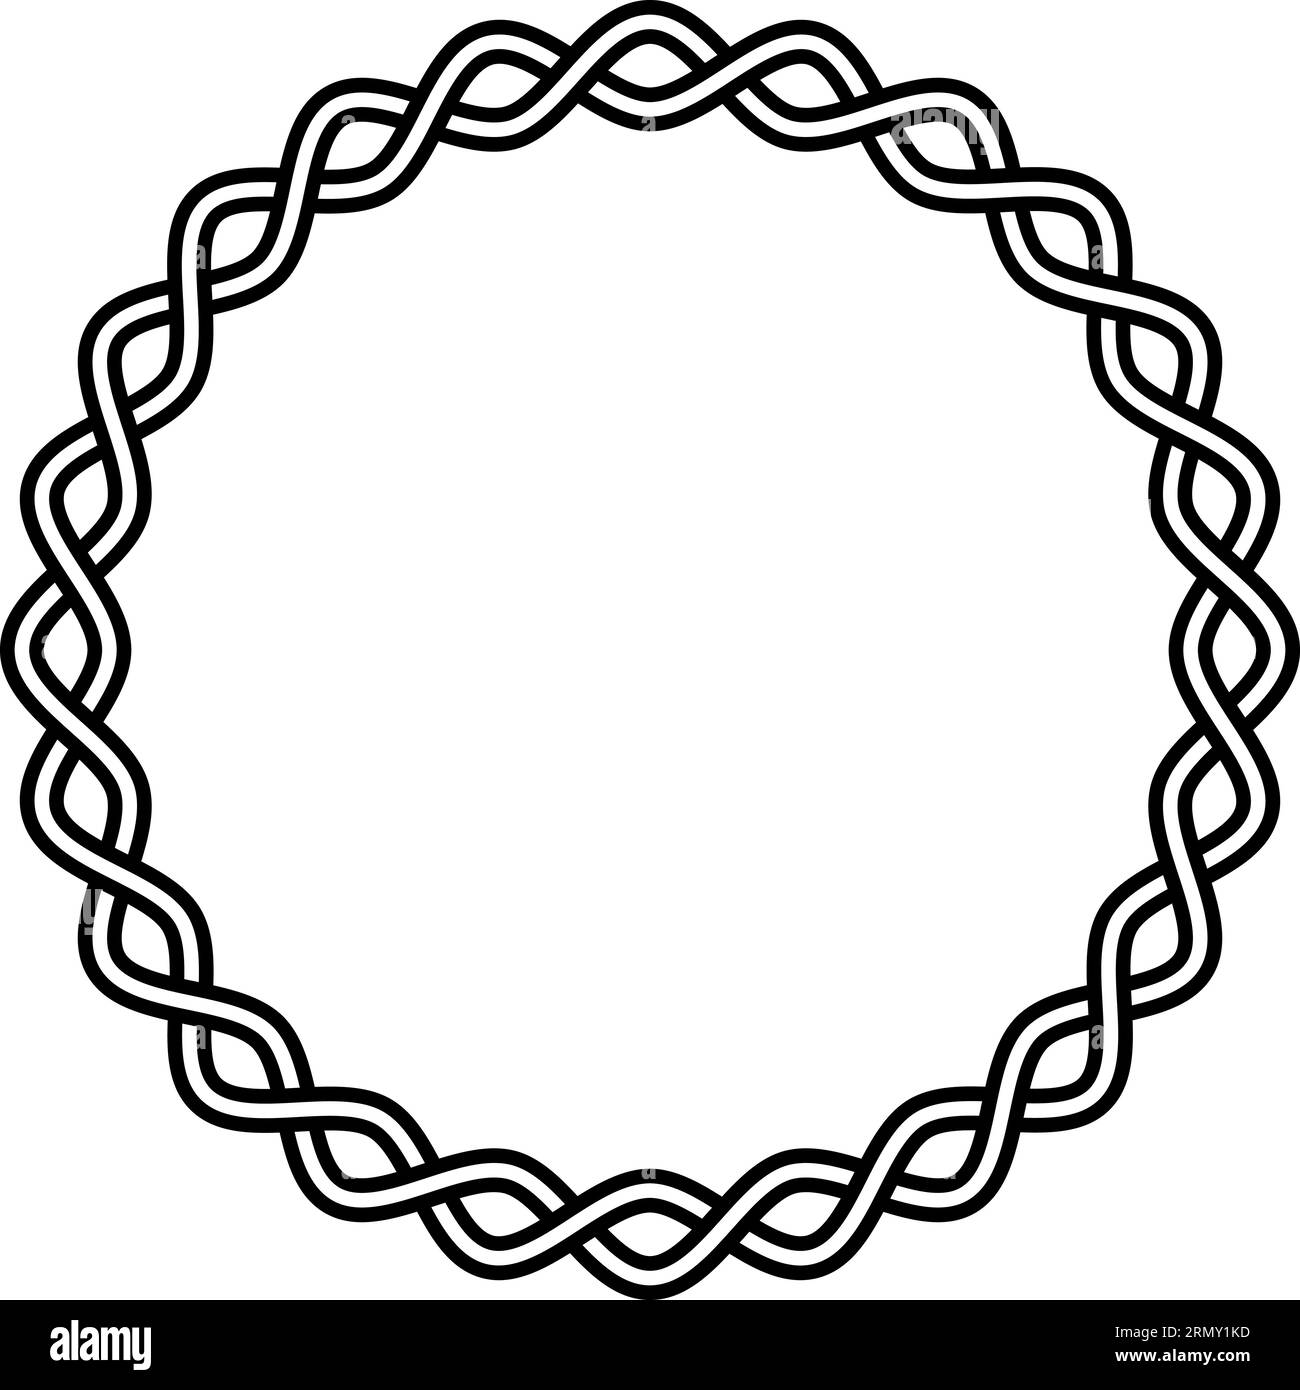 Round frame braided cable, wavy intersecting lines vignette pattern decoration Stock Vector